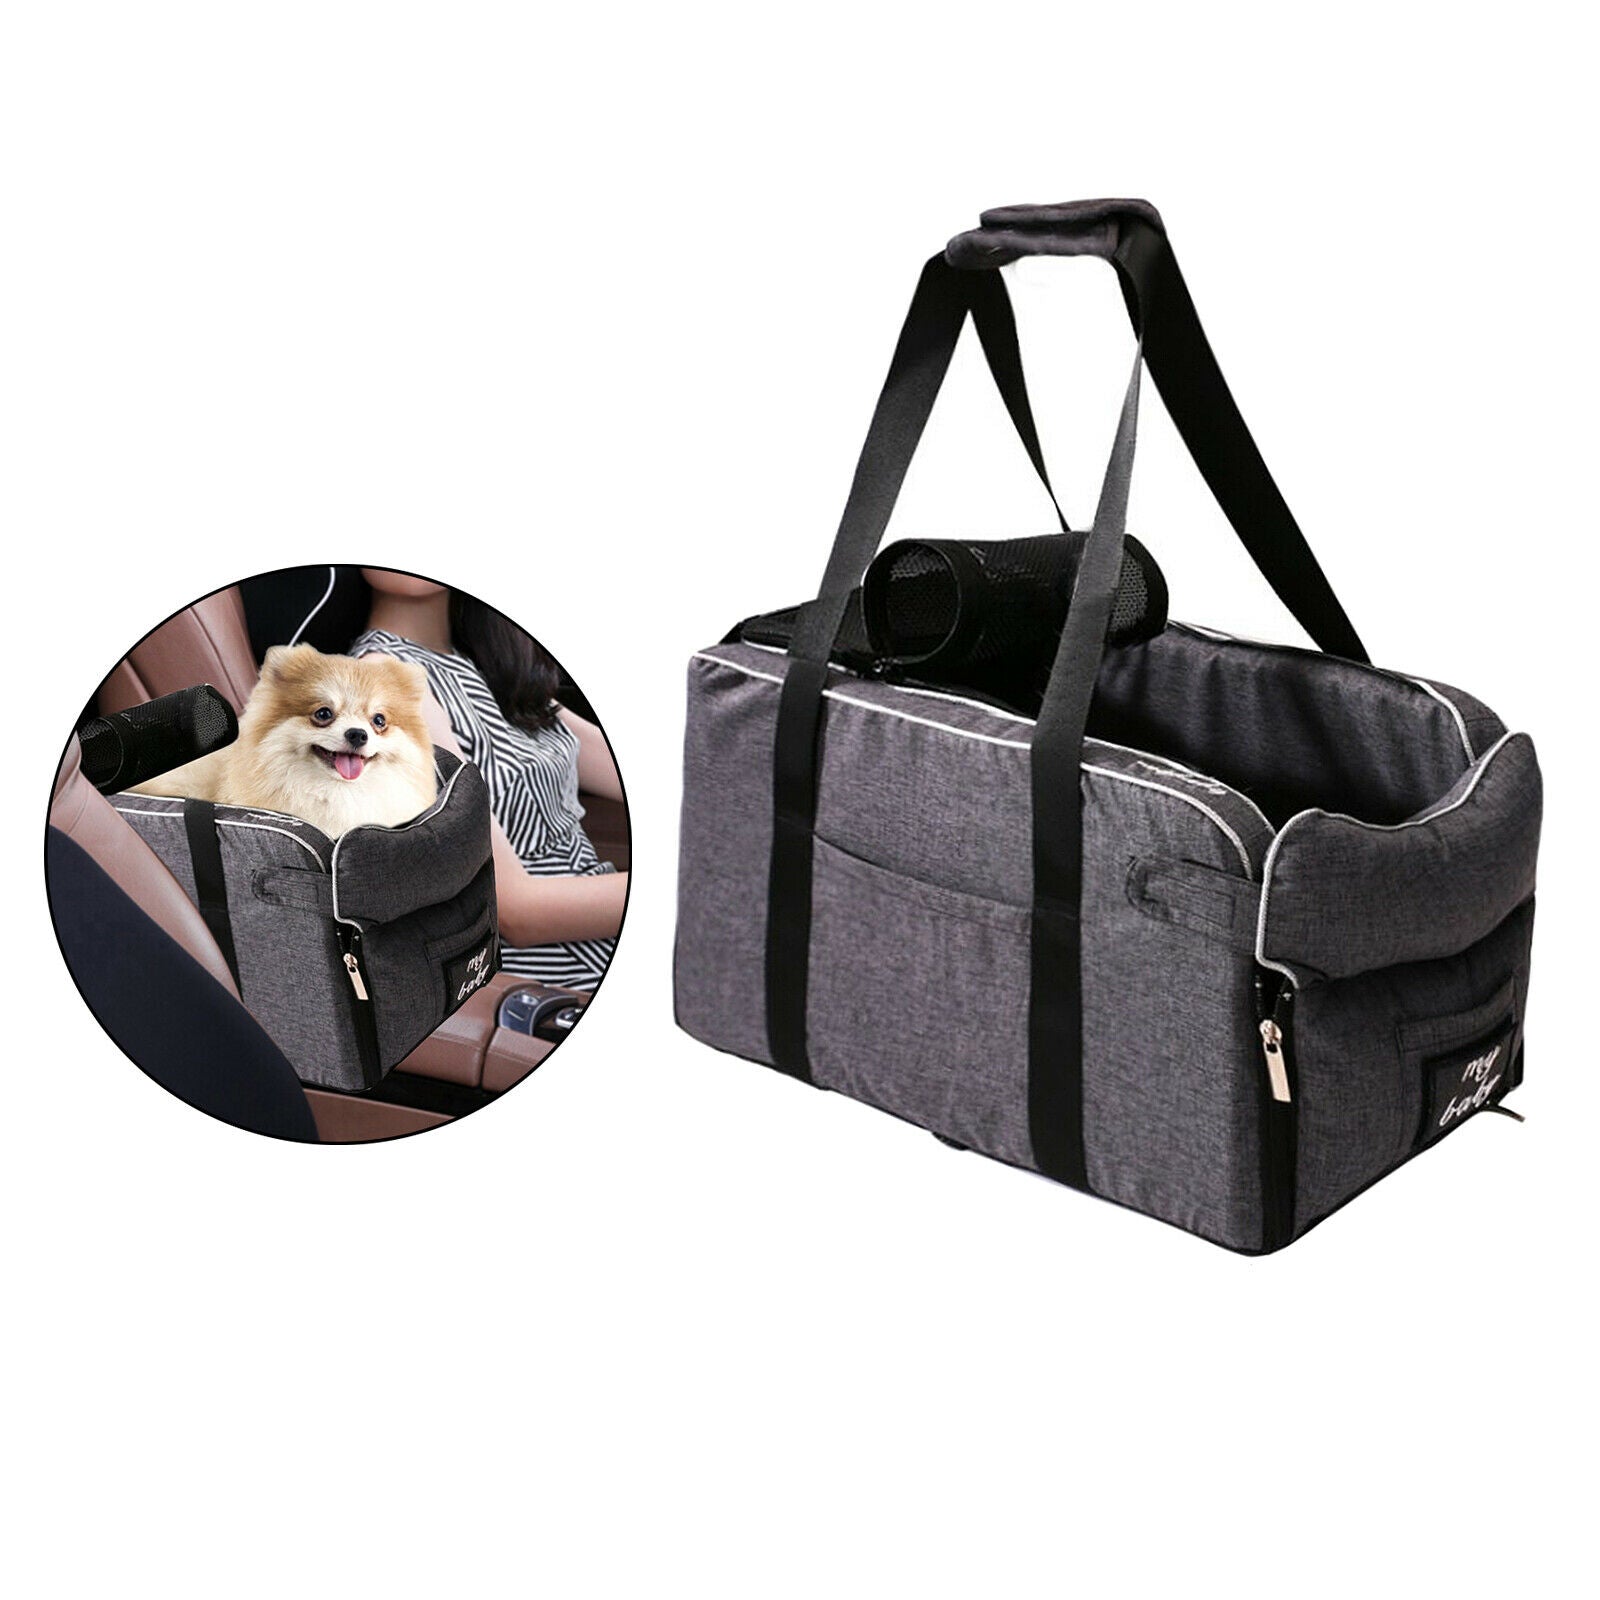 Dog Car Carrier Safety Small Pets Cat Booster Seat Crate for SUV Van Truck Gray